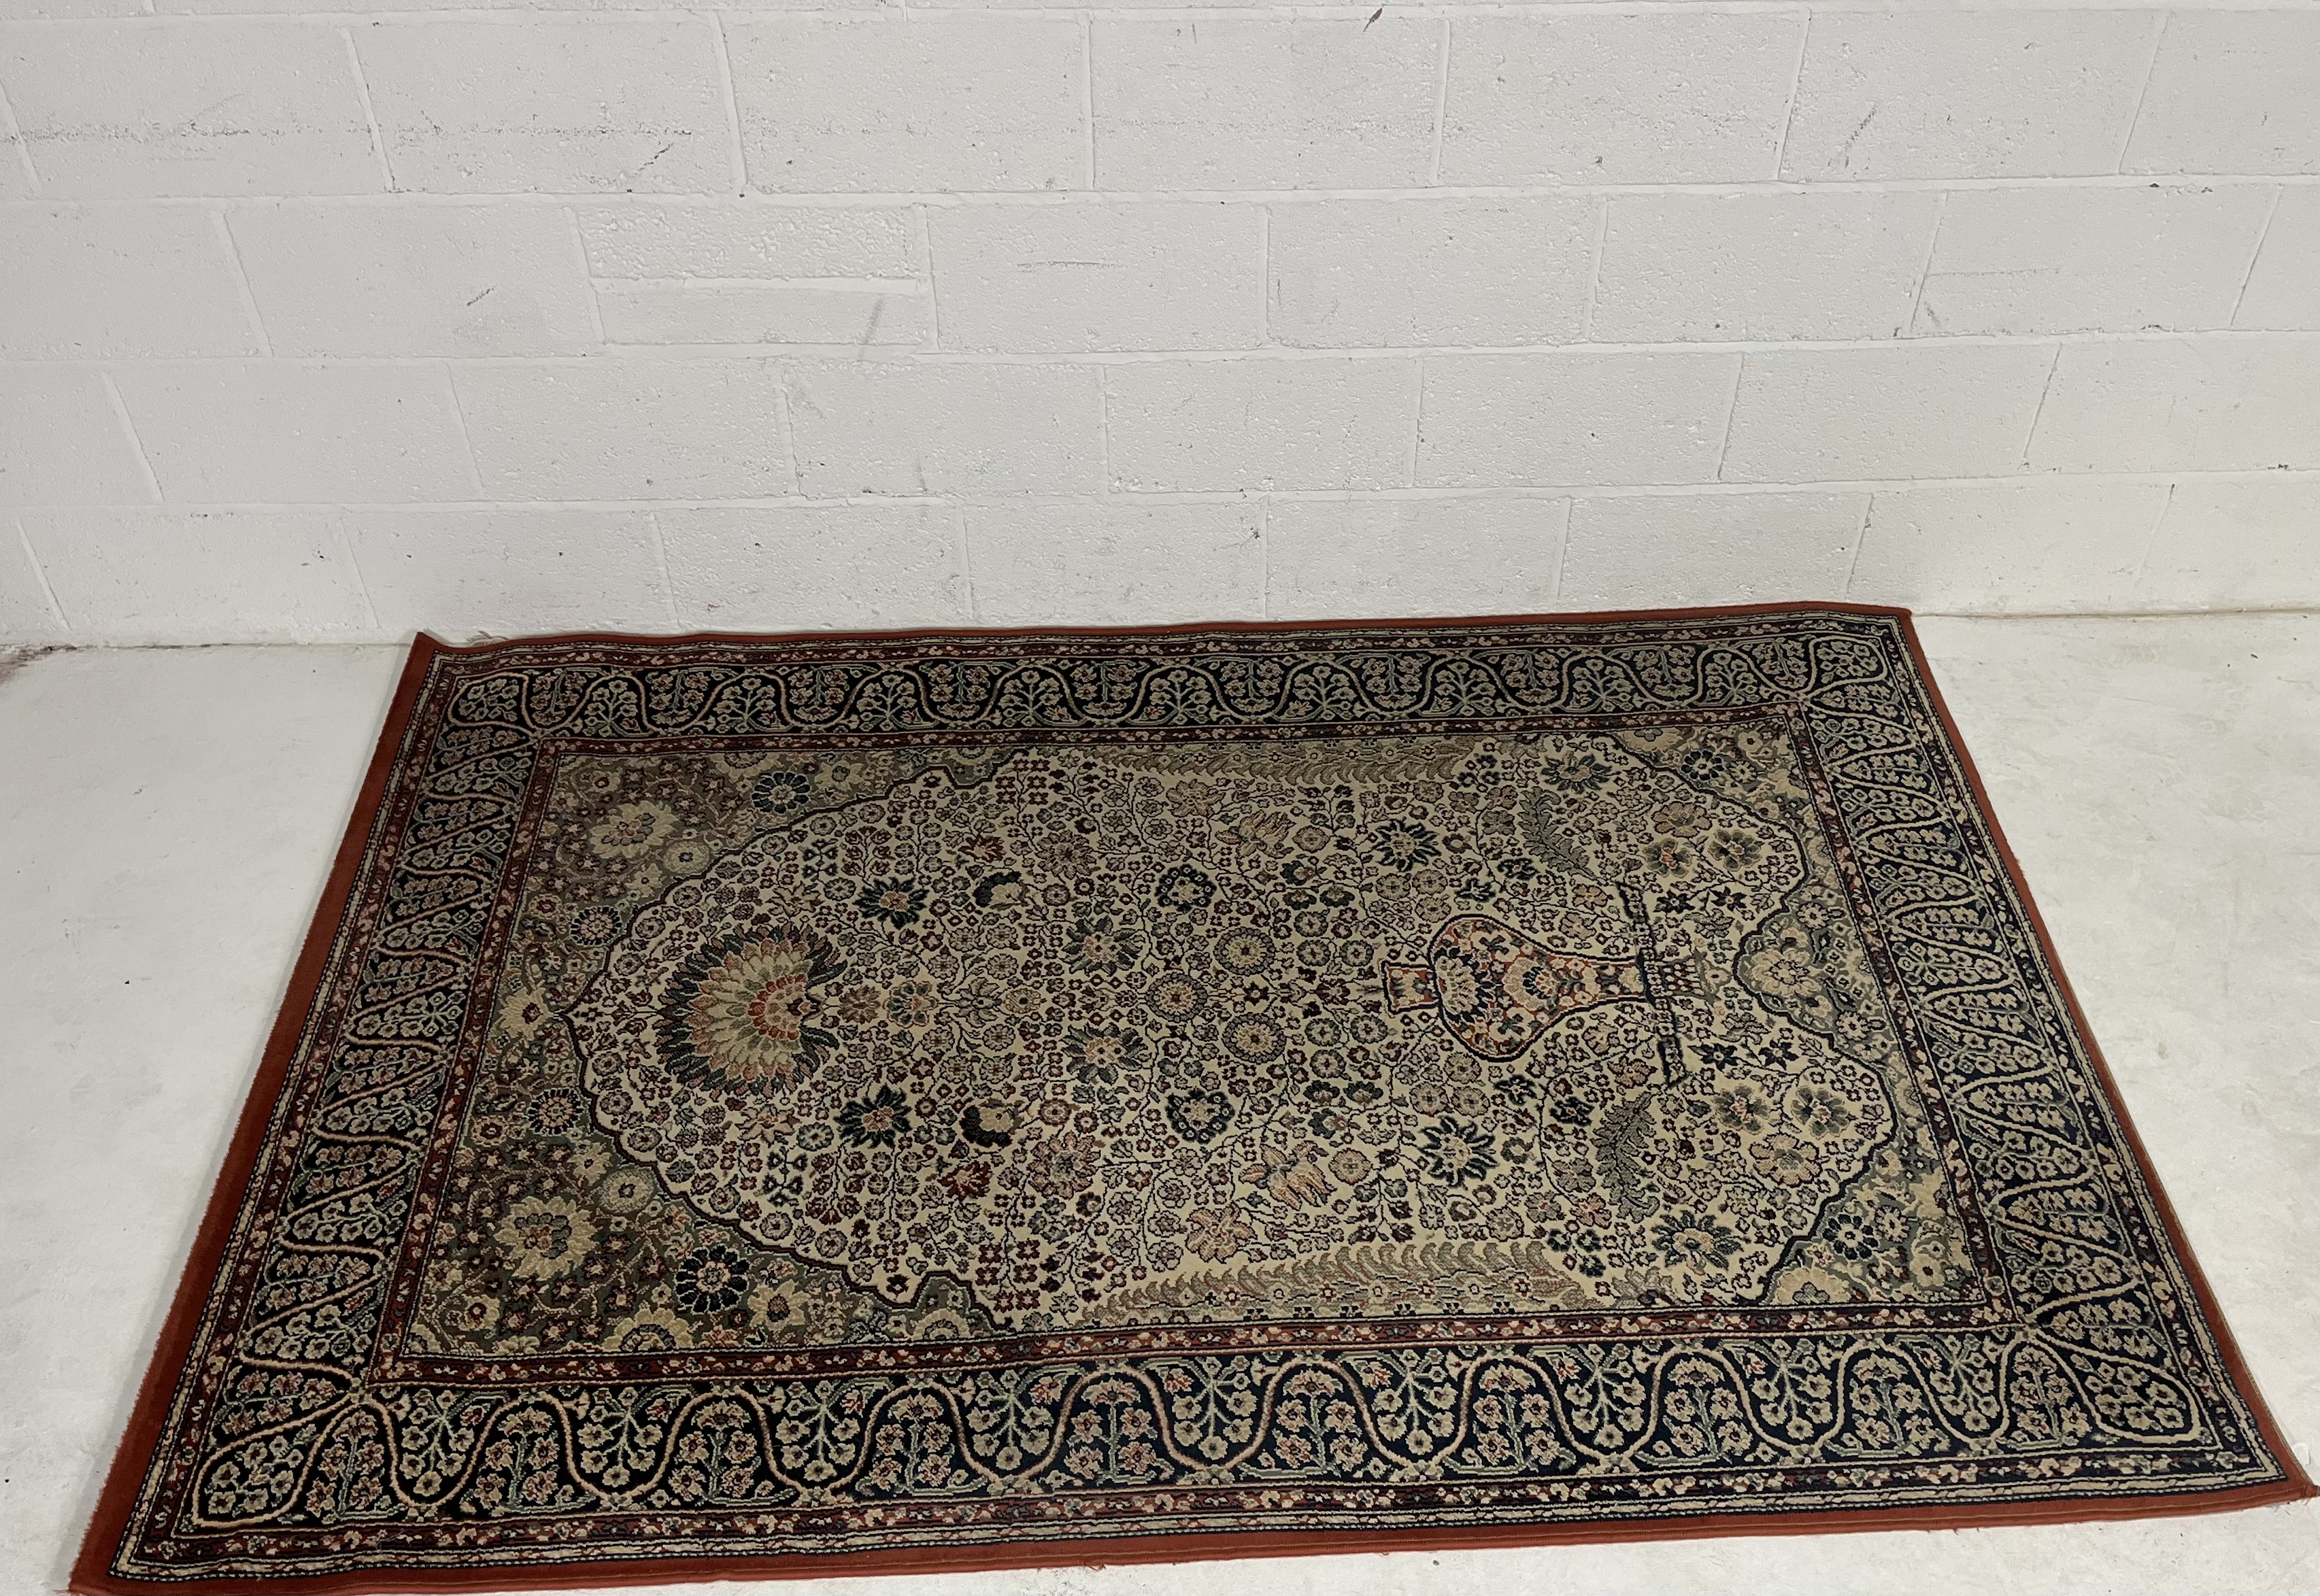 Two Eastern style rugs, Multi pattern 160 cm wide x 230 cm length, Cream ground with central - Image 2 of 4